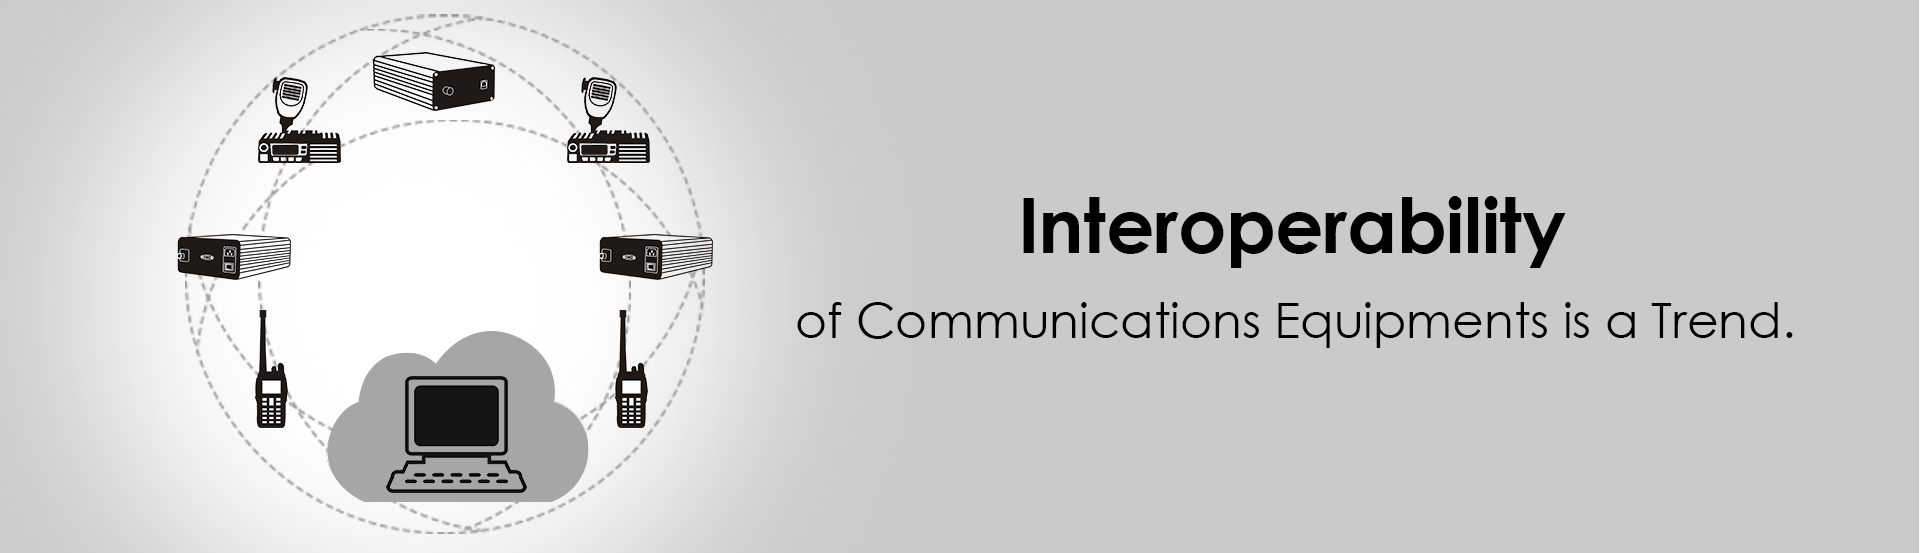 Why Public Safety Agencies Can’t Talk and Why Interoperability is Important